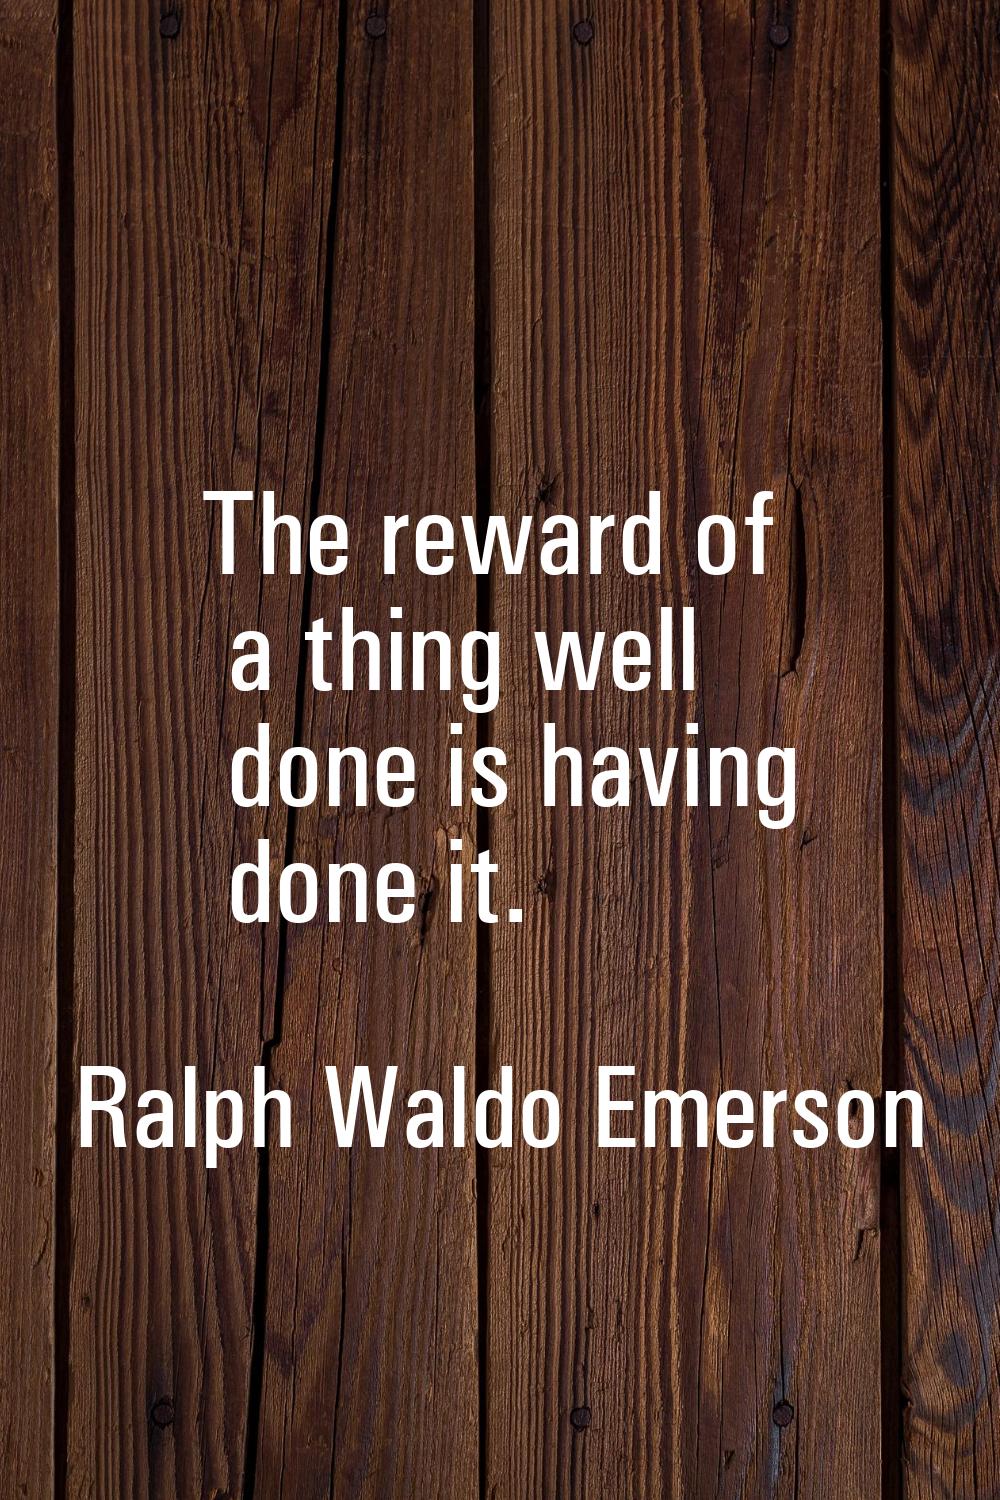 The reward of a thing well done is having done it.